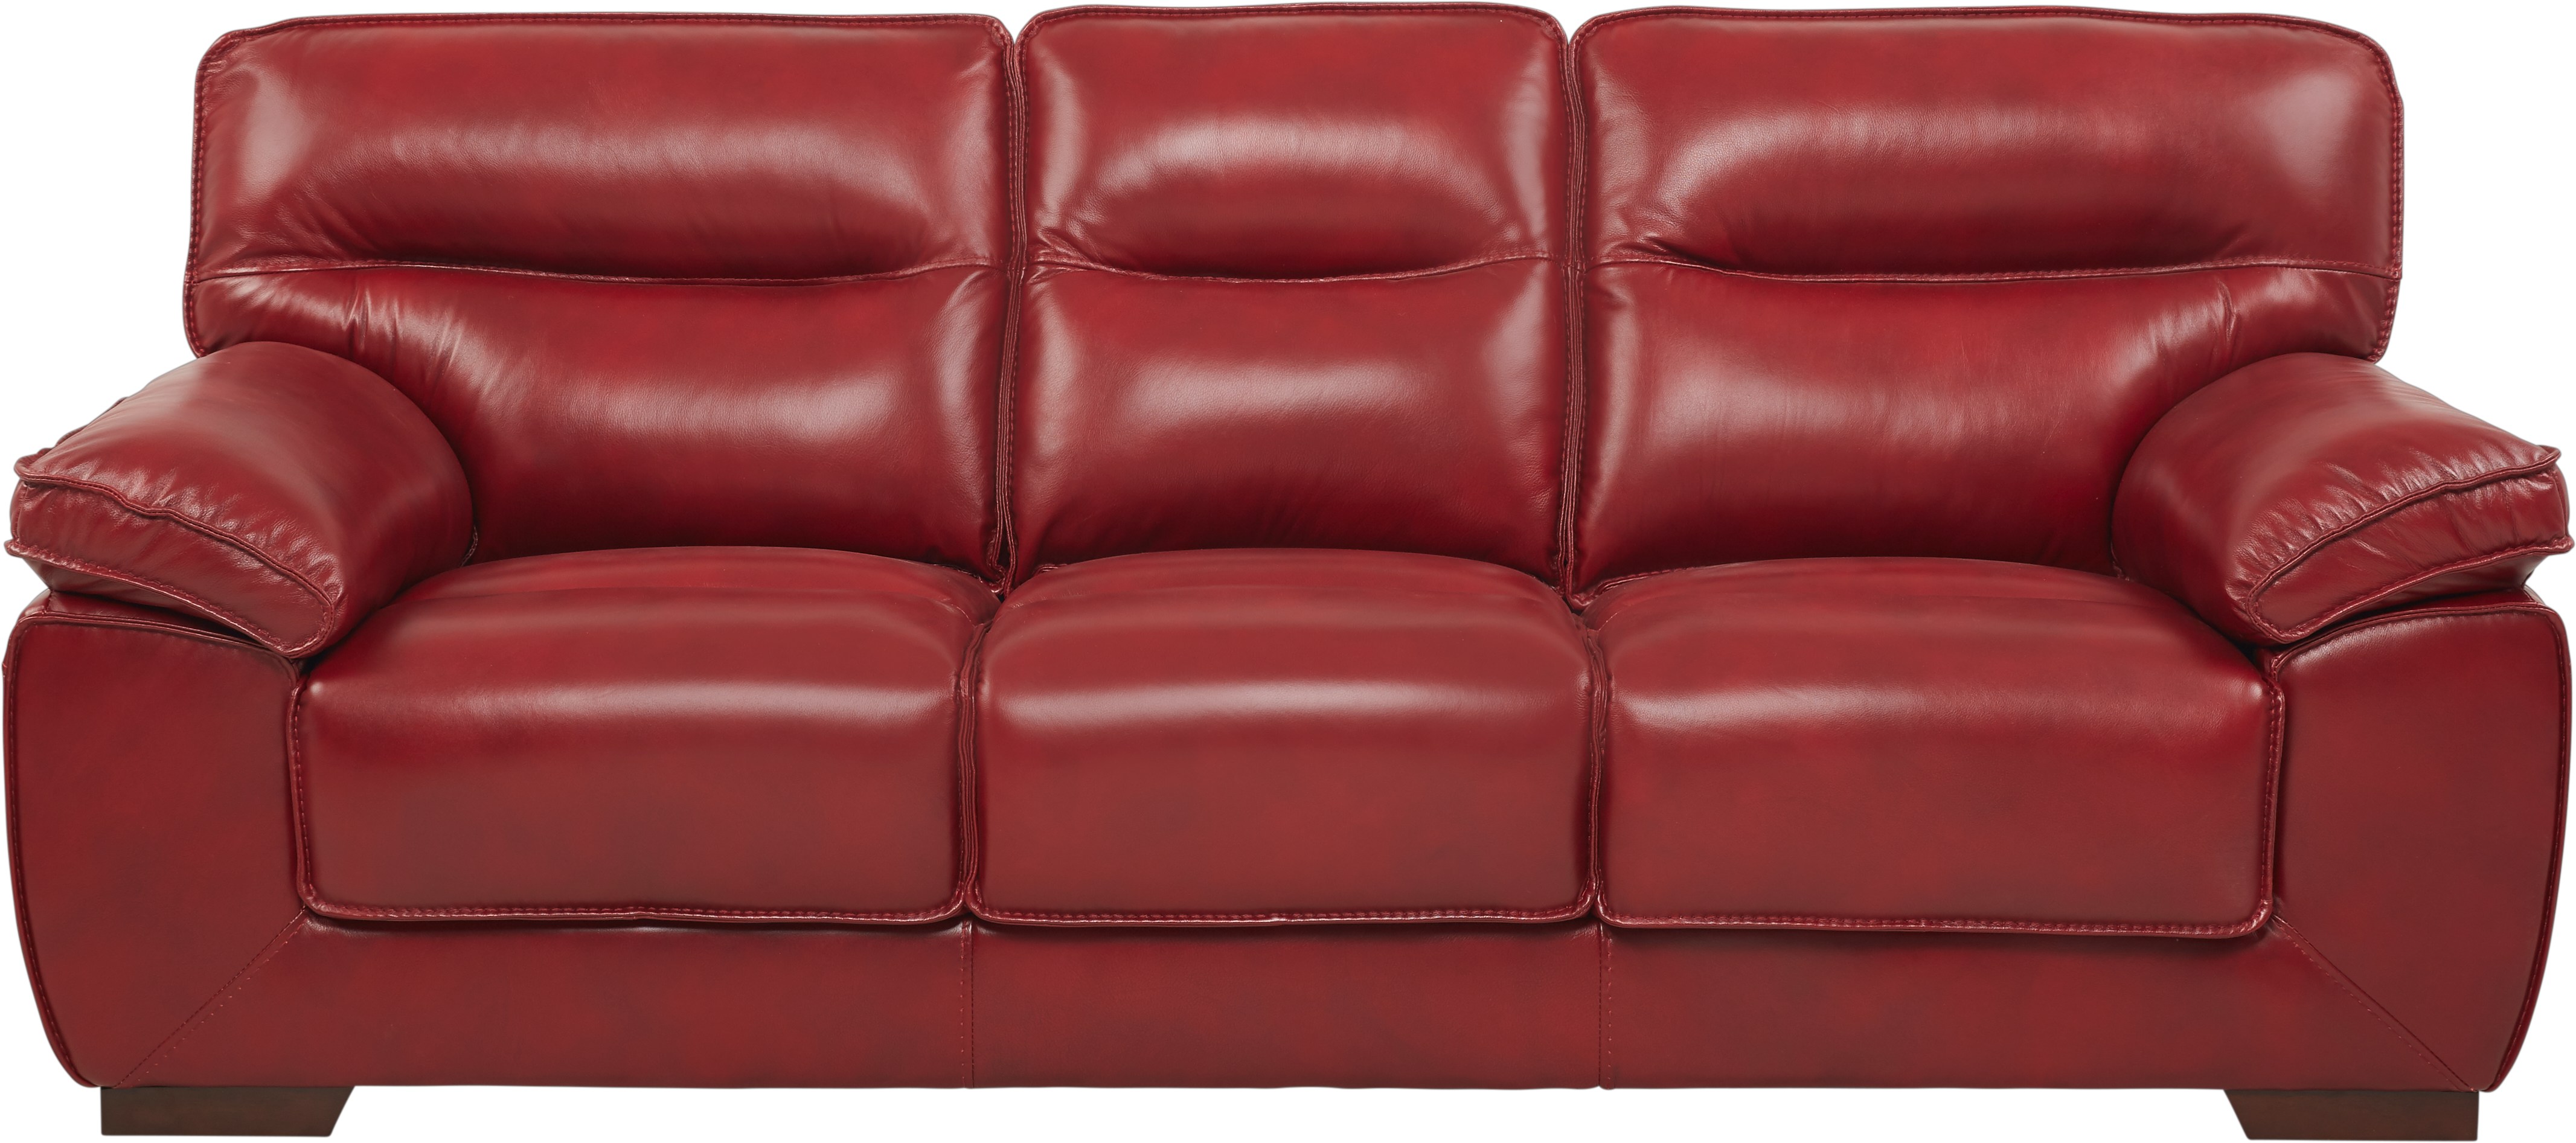 red leather sofa sets on sale